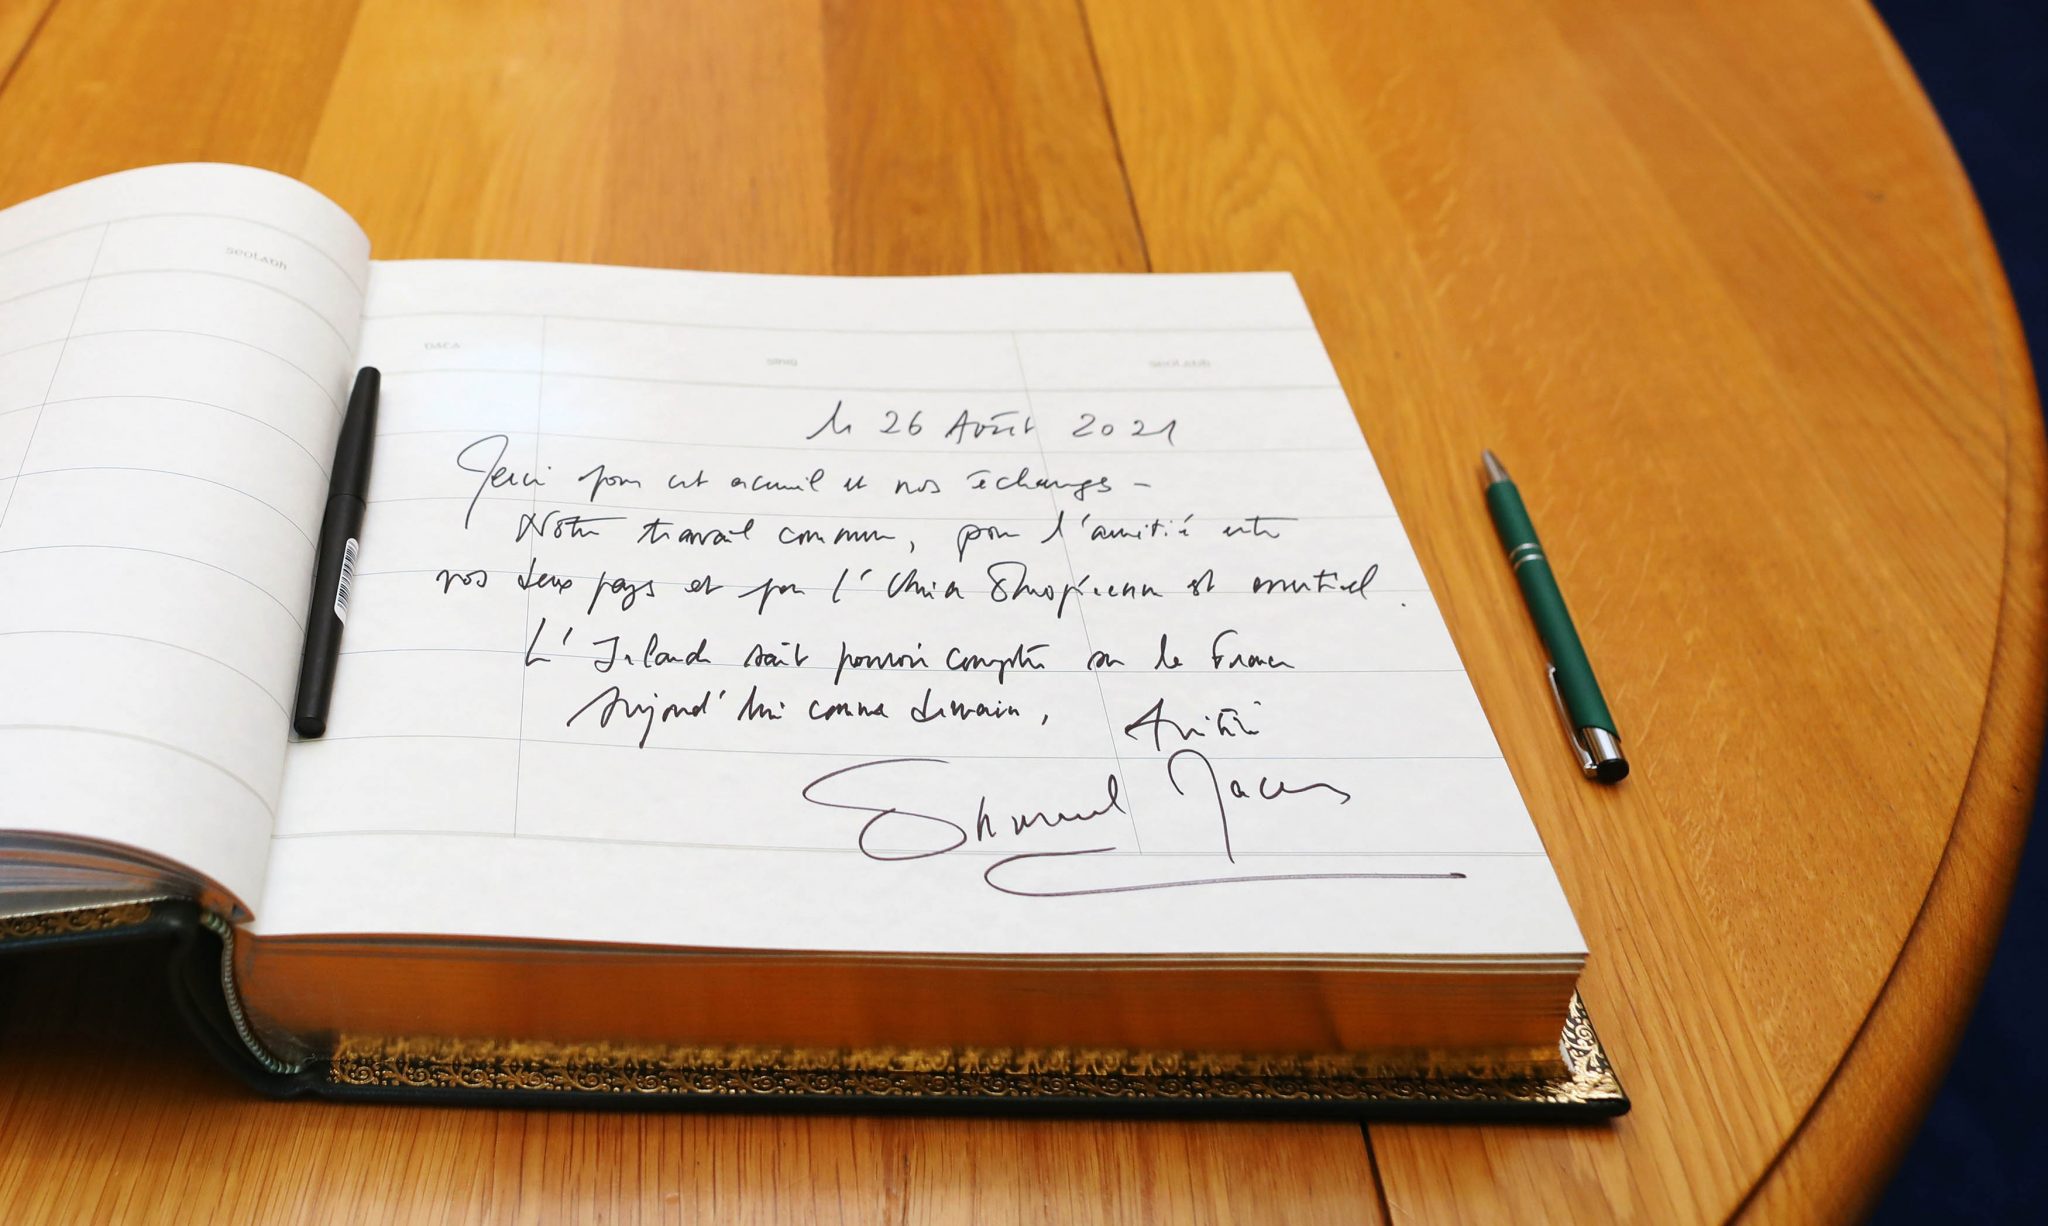 A note written by French President Emmanuel Macron in the welcome book at Government Buildings in Dublin, 26-08-2021